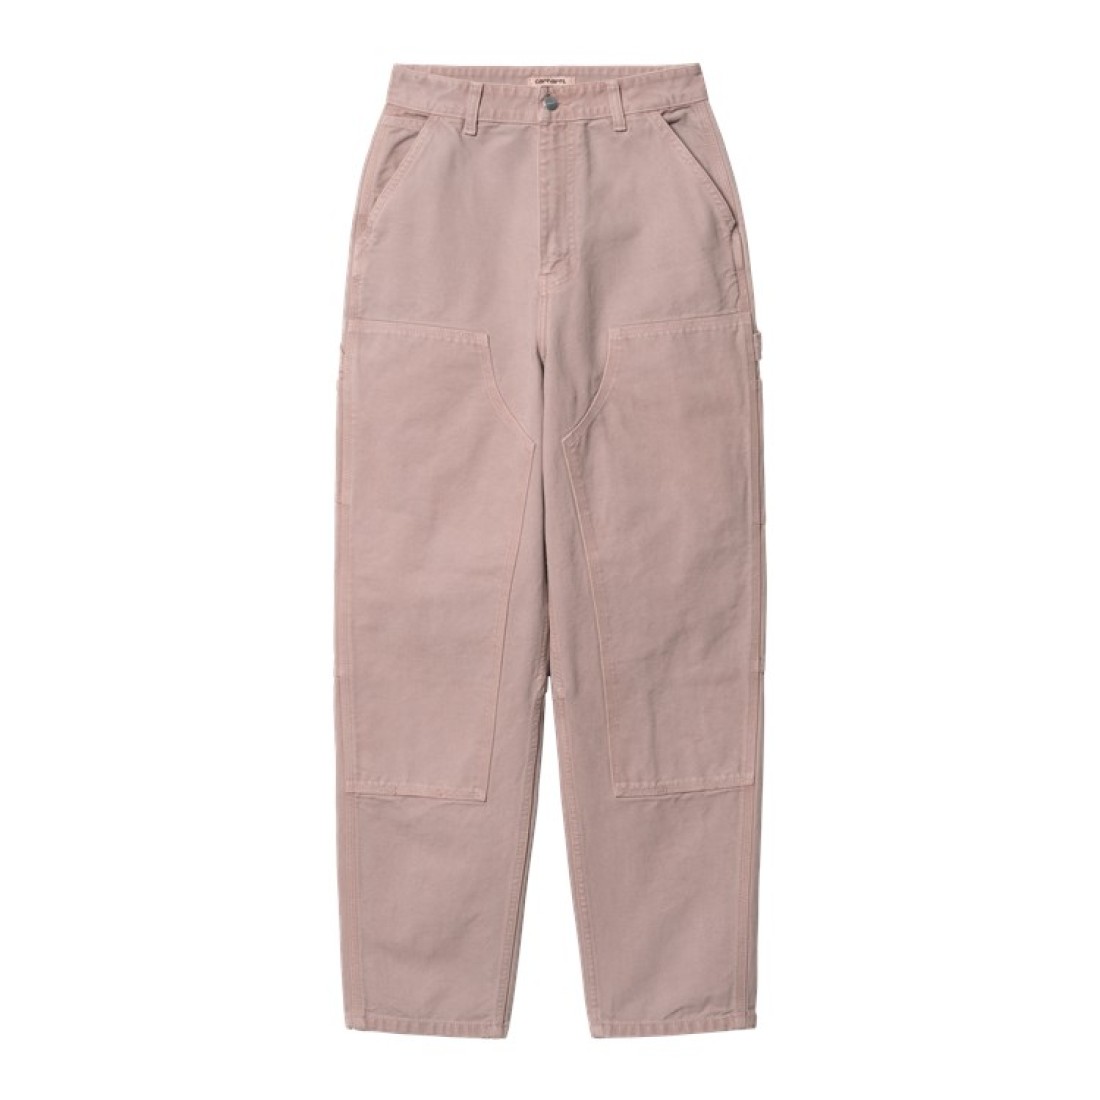 W' Amherst Pant Lupinus Faded Carhartt WIP